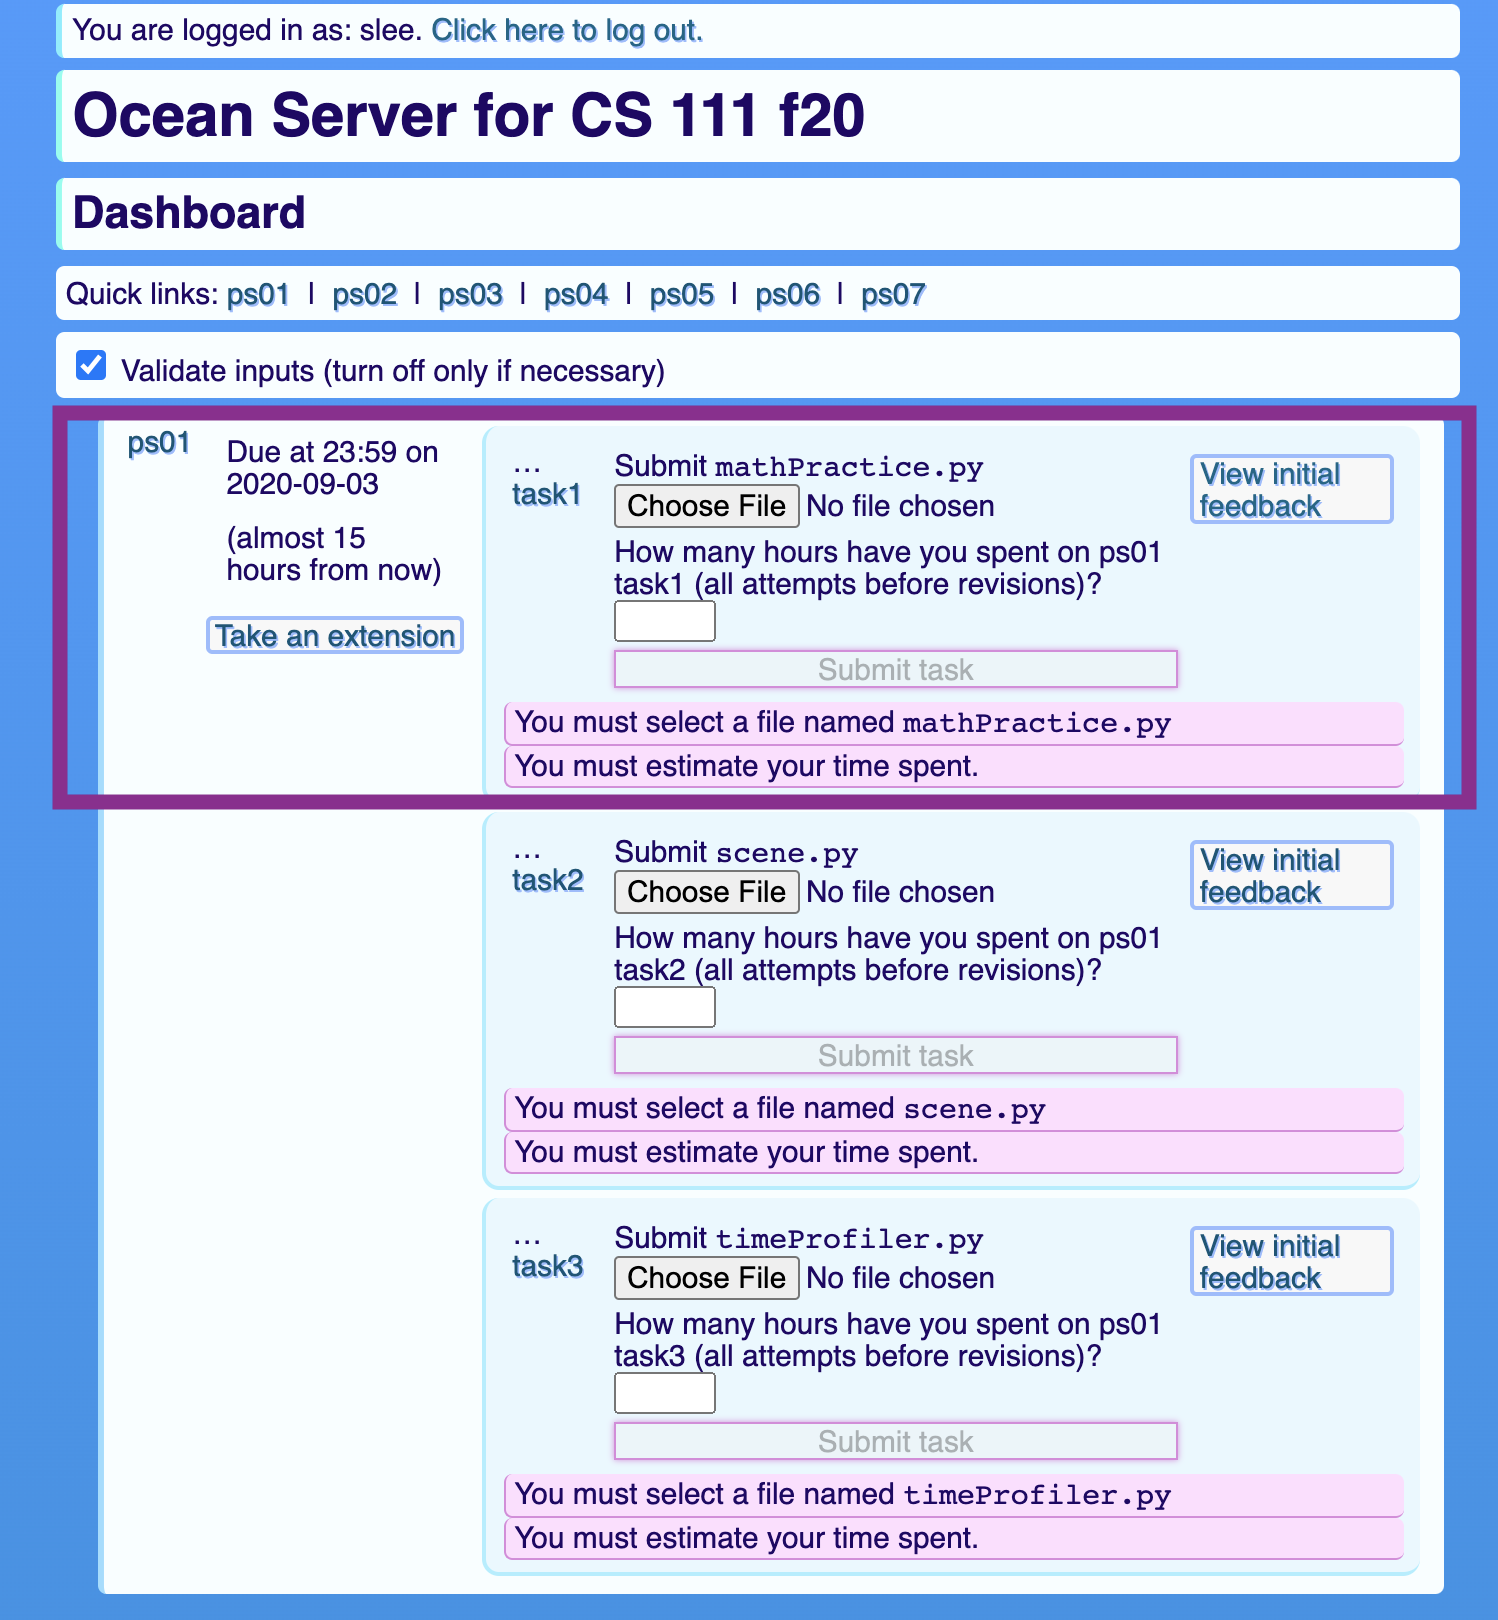 The Ocean interface. There is login information at the very top with a link to log out. Next are quick links for each problem set, followed by a checkbox that can be used to disable form validation (use this only if necessary). Then there is a list of problem sets, each of which has a name, due date information (where the button to request an extension is placed) and series of tasks. Each task has informtion about your submission status, a task name, a form for submitting it including a file chooser and a text field for estimating how long it took you, and a submit button. Each task also has a link to 'View initial feedback' and some warning messages below, which initially indicate that you haven't yet chosen the right filename or estimated your time spent. The warning messages should be linked to the form inputs so you don't have to jump back and forth to check them, although warnings about problems with your submission will also appear at the end of each task.